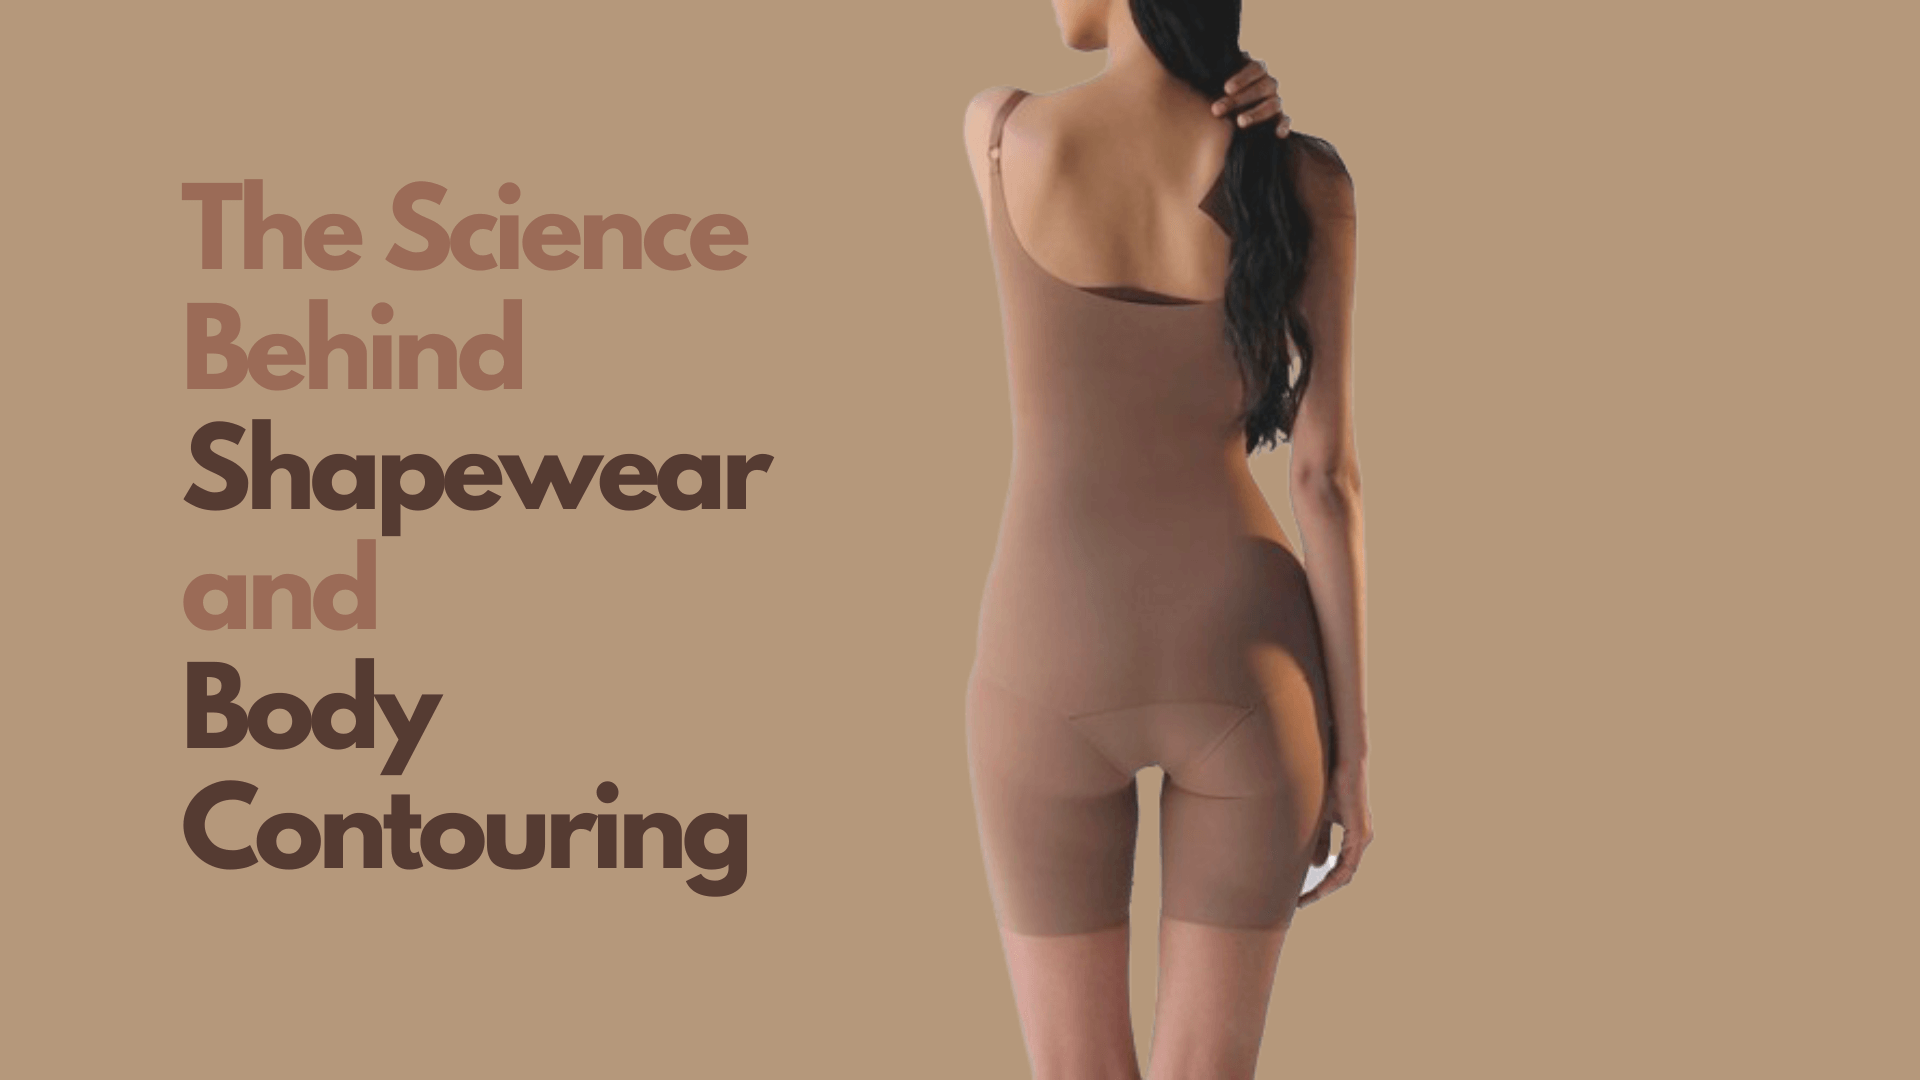 The Science Behind Shapewear and Body Contouring